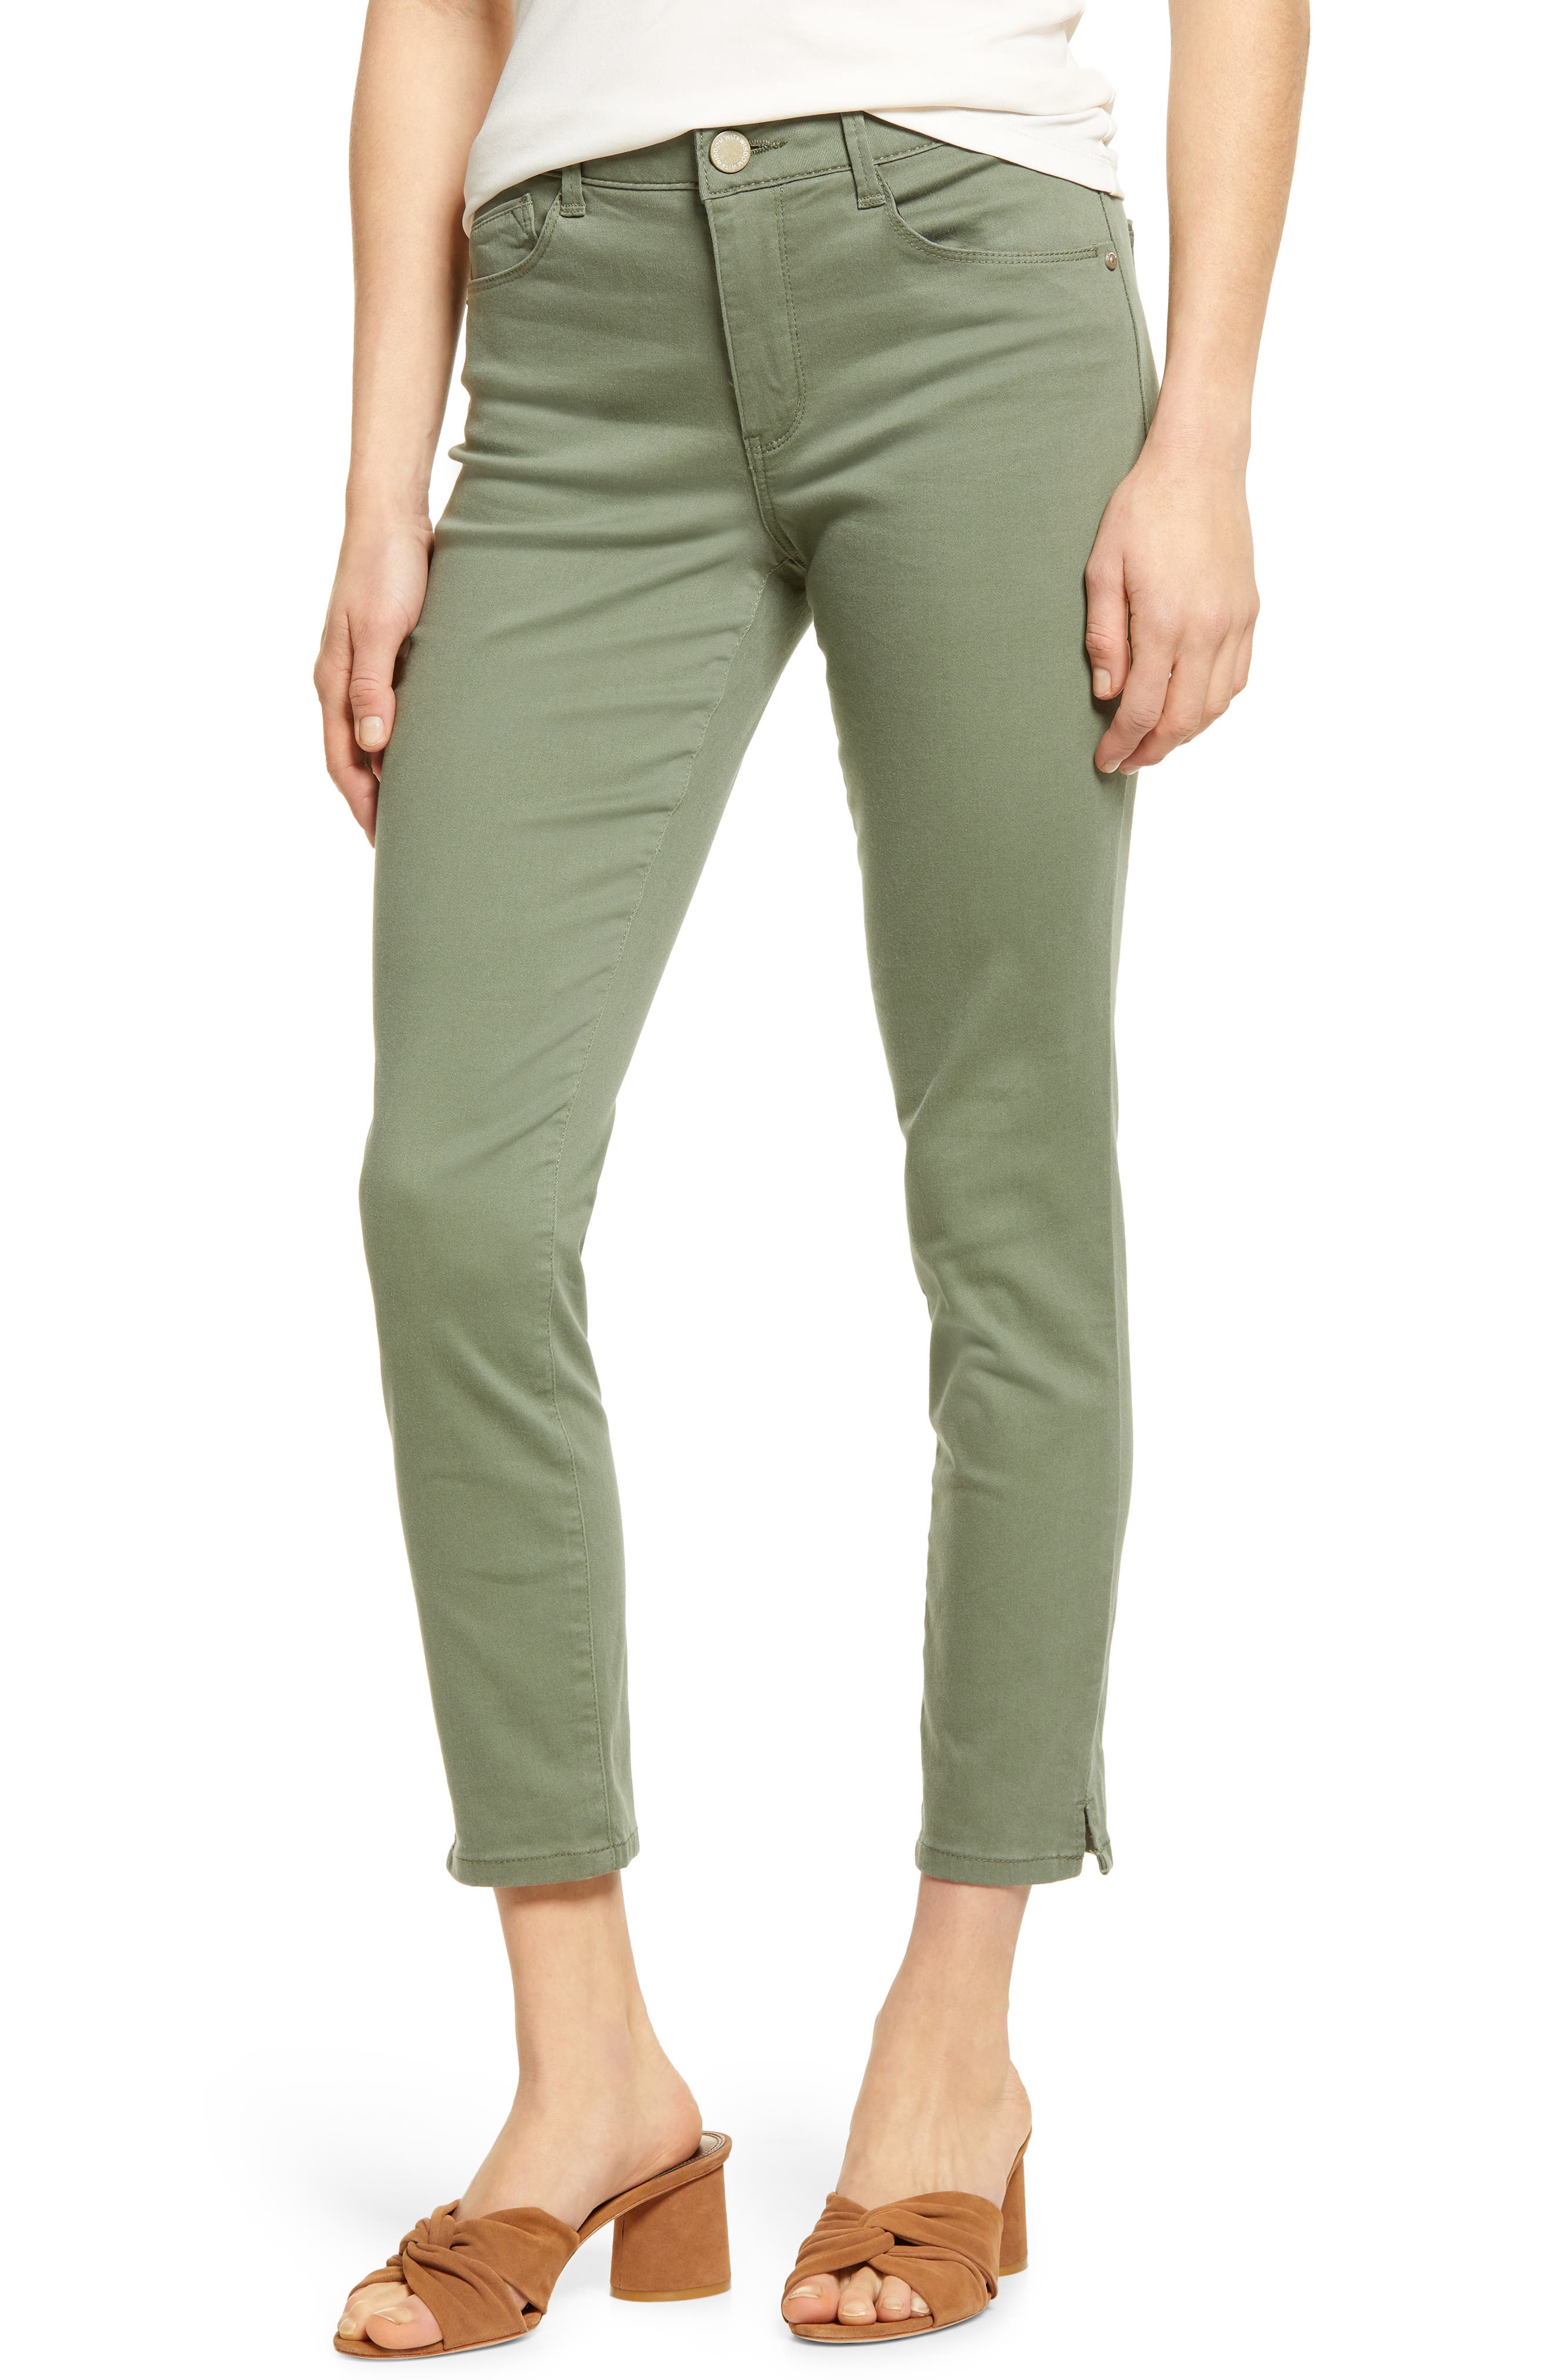 natural clothing for women flax capris Green linen pants tapered linen pants